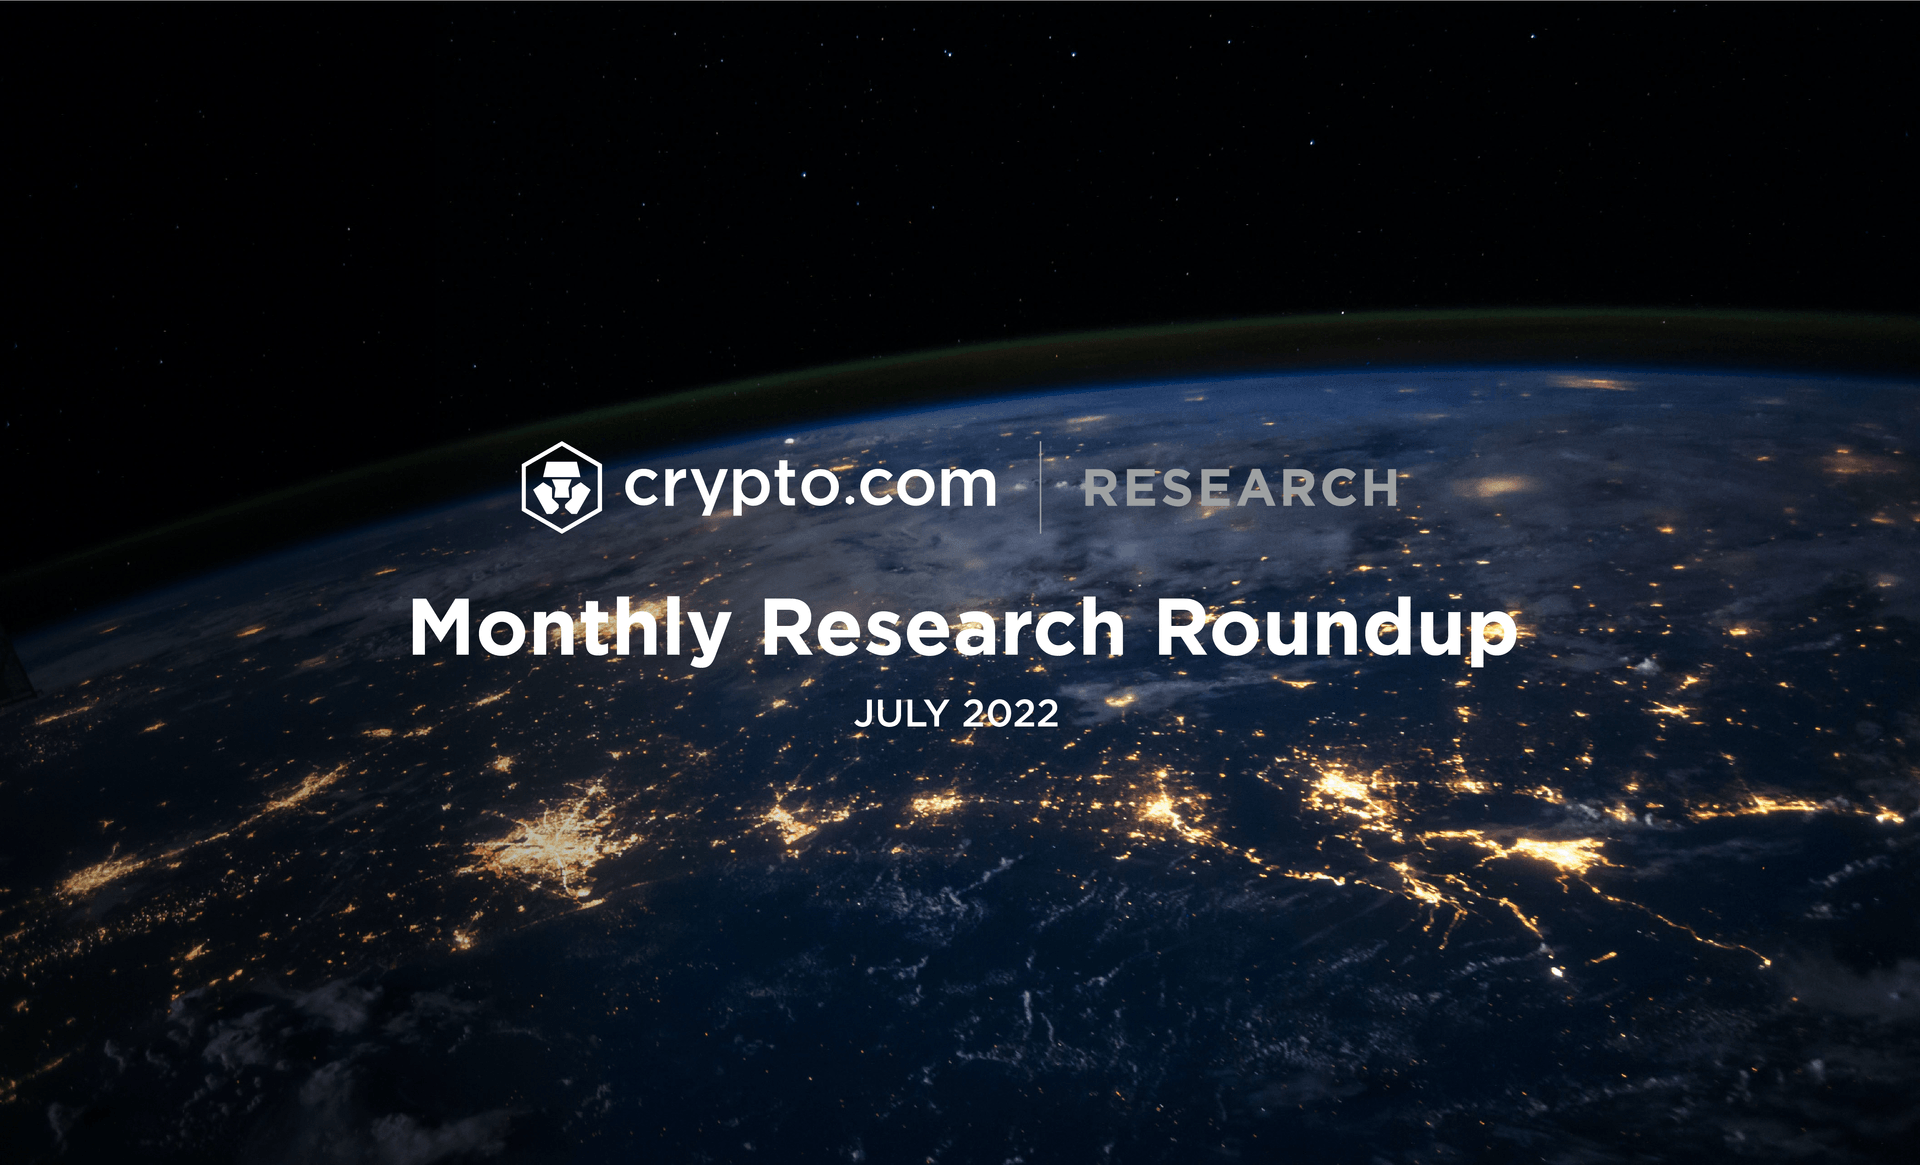 Monthly Research Roundup July 2022